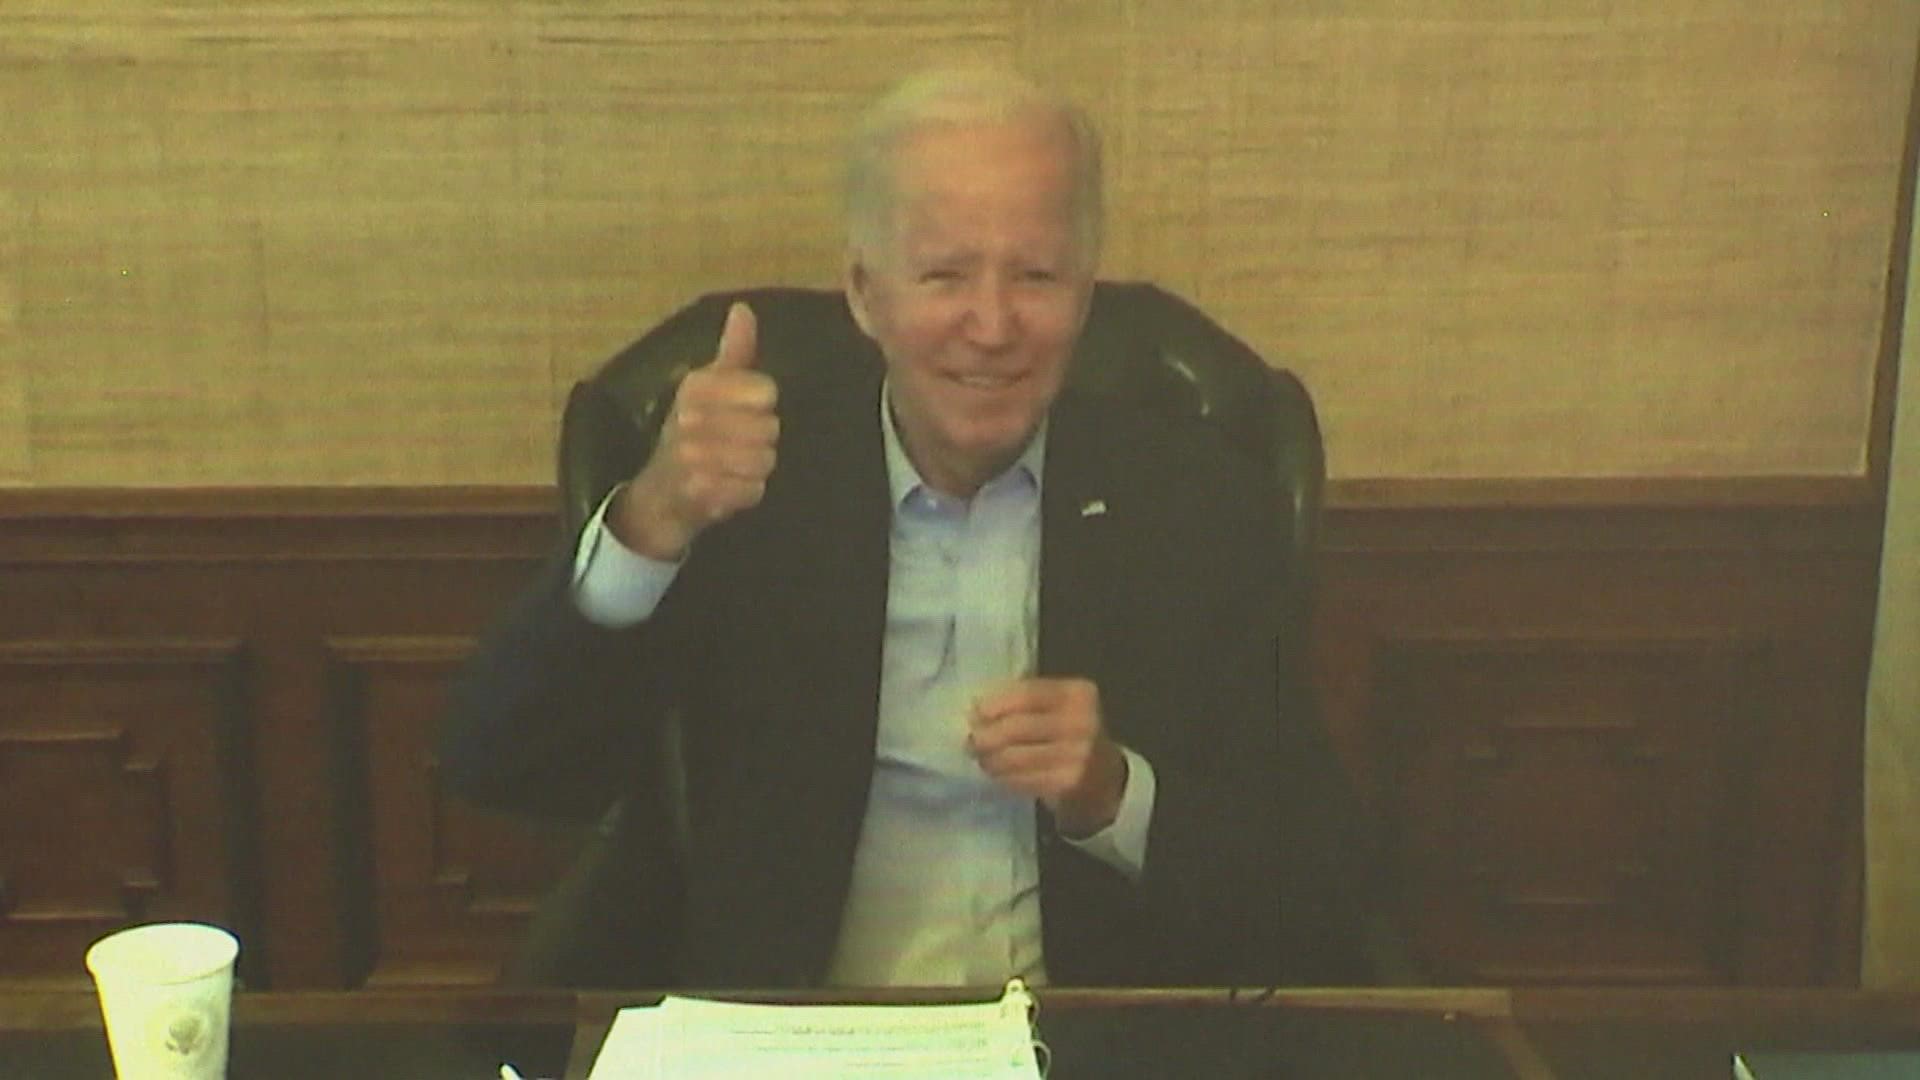 Biden's symptoms include a sore throat, runny nose, cough and body aches.